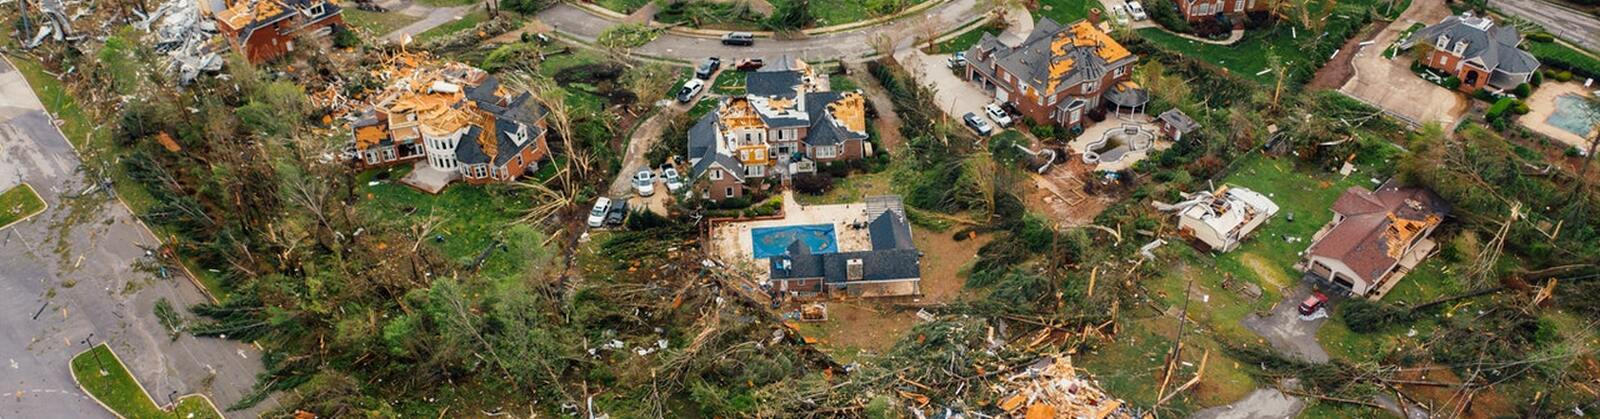 NC Trees & Storms: Readiness, Response, & Recovery